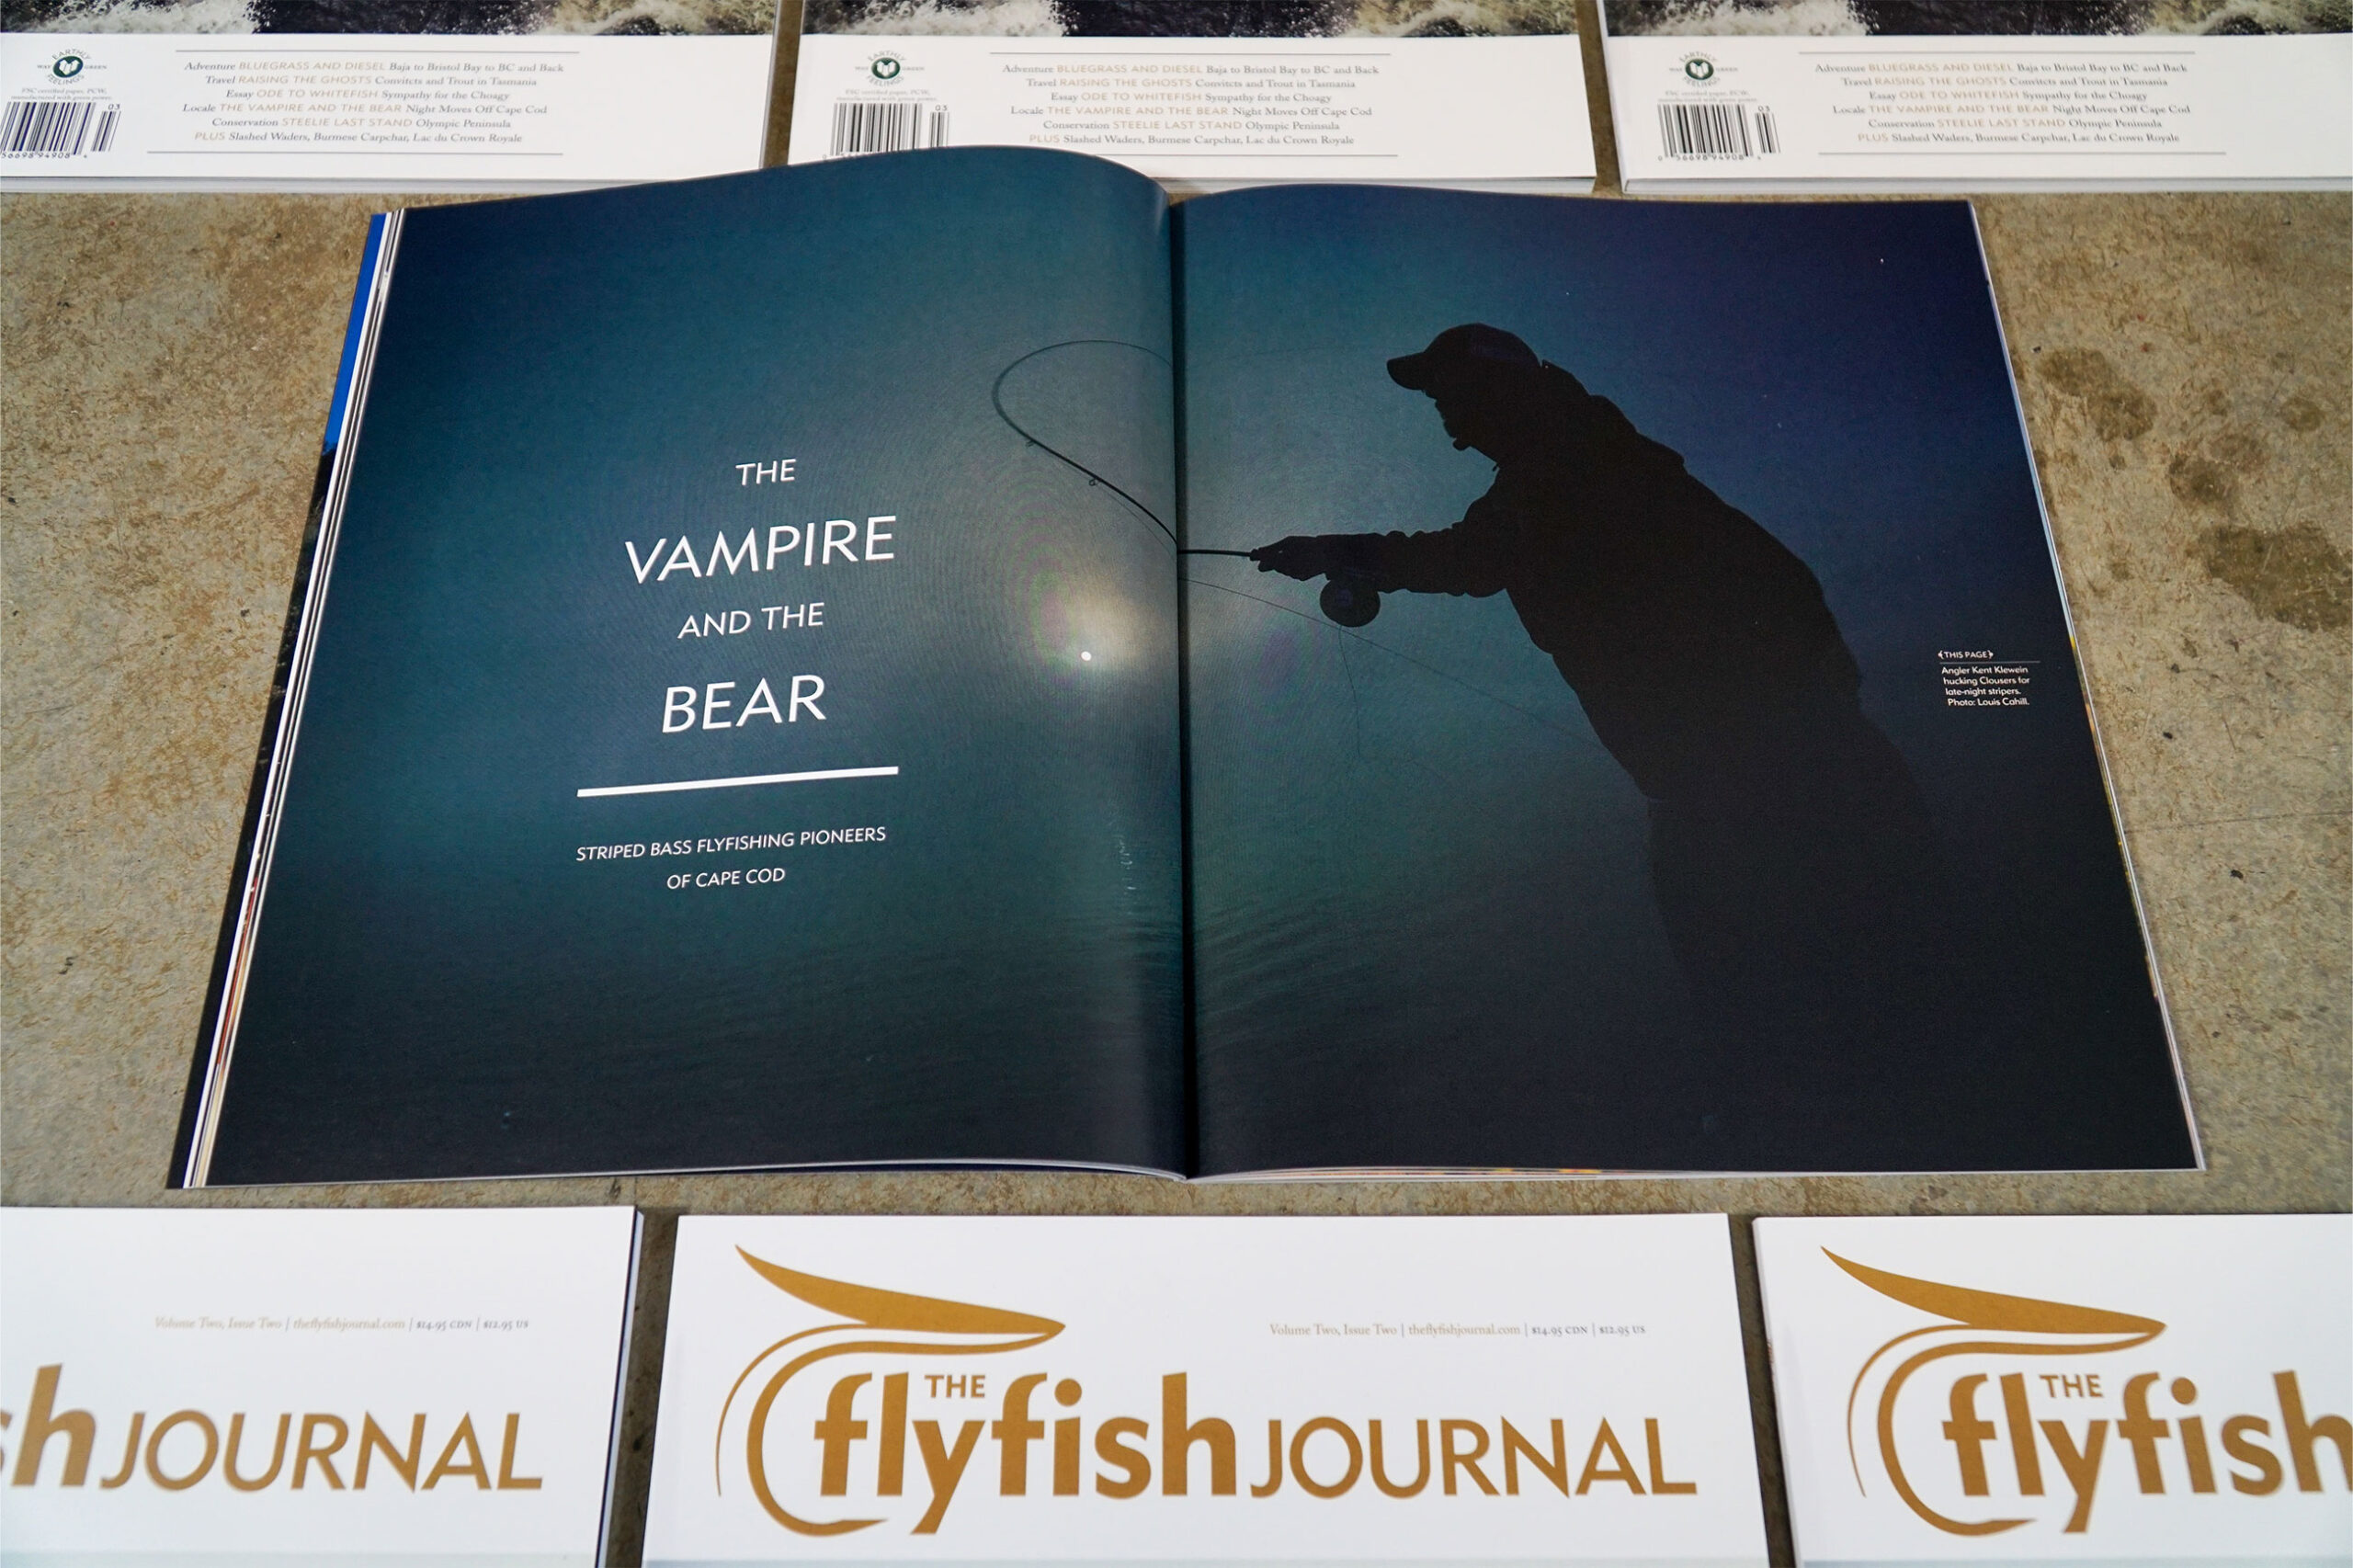 The Flyfish Journal Volume 2 Issue 2 Feature The Vampire and the Bear